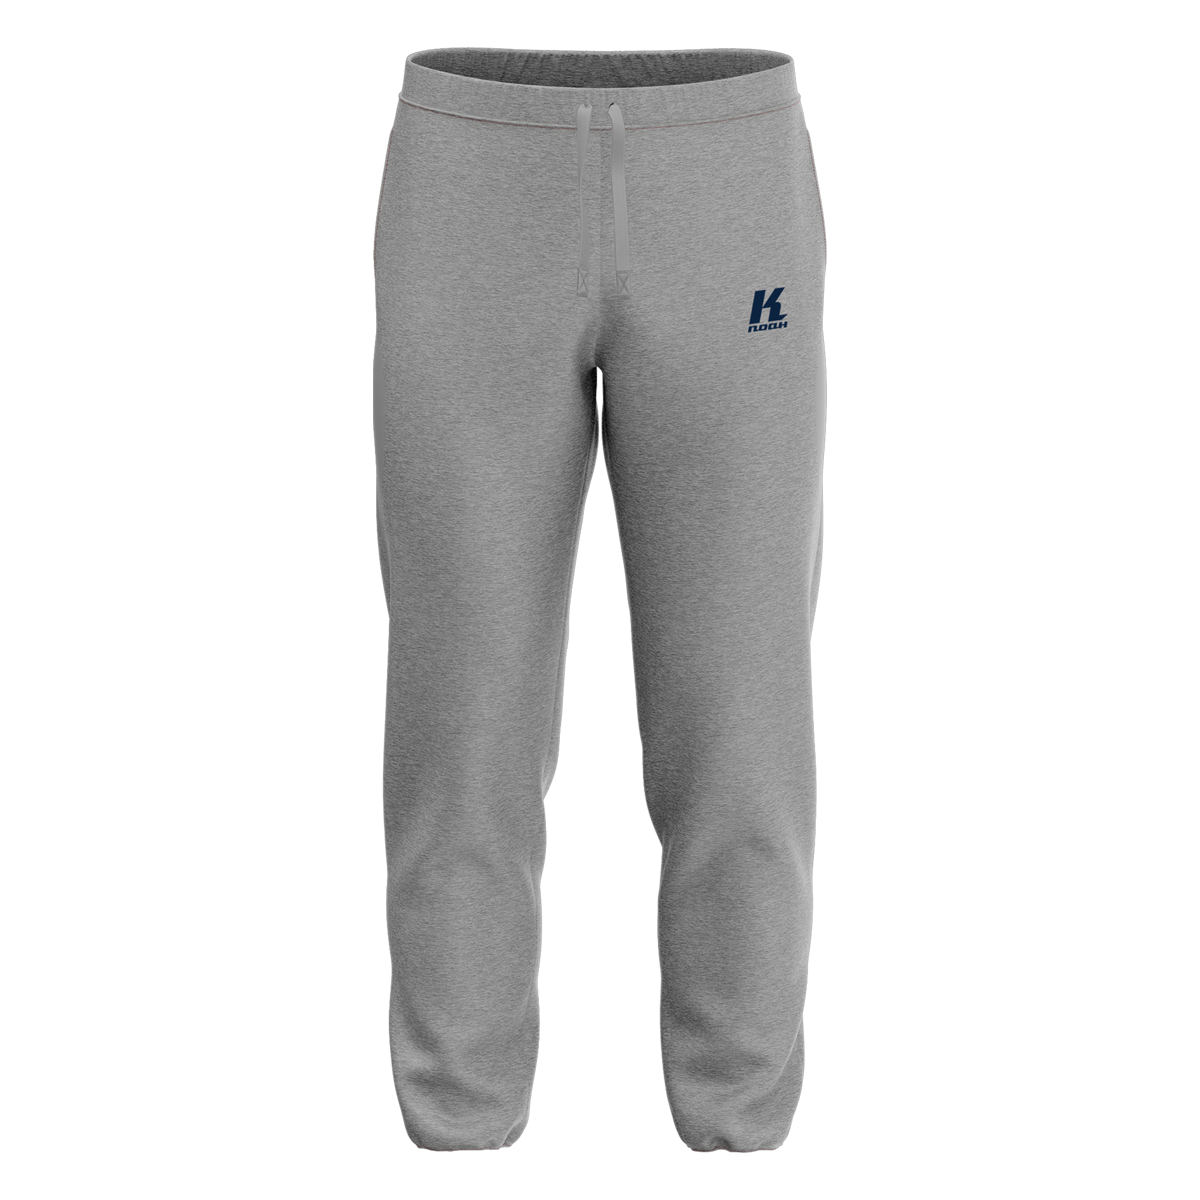 Rams Basic Sweatpant with Cuffs Grey ST793